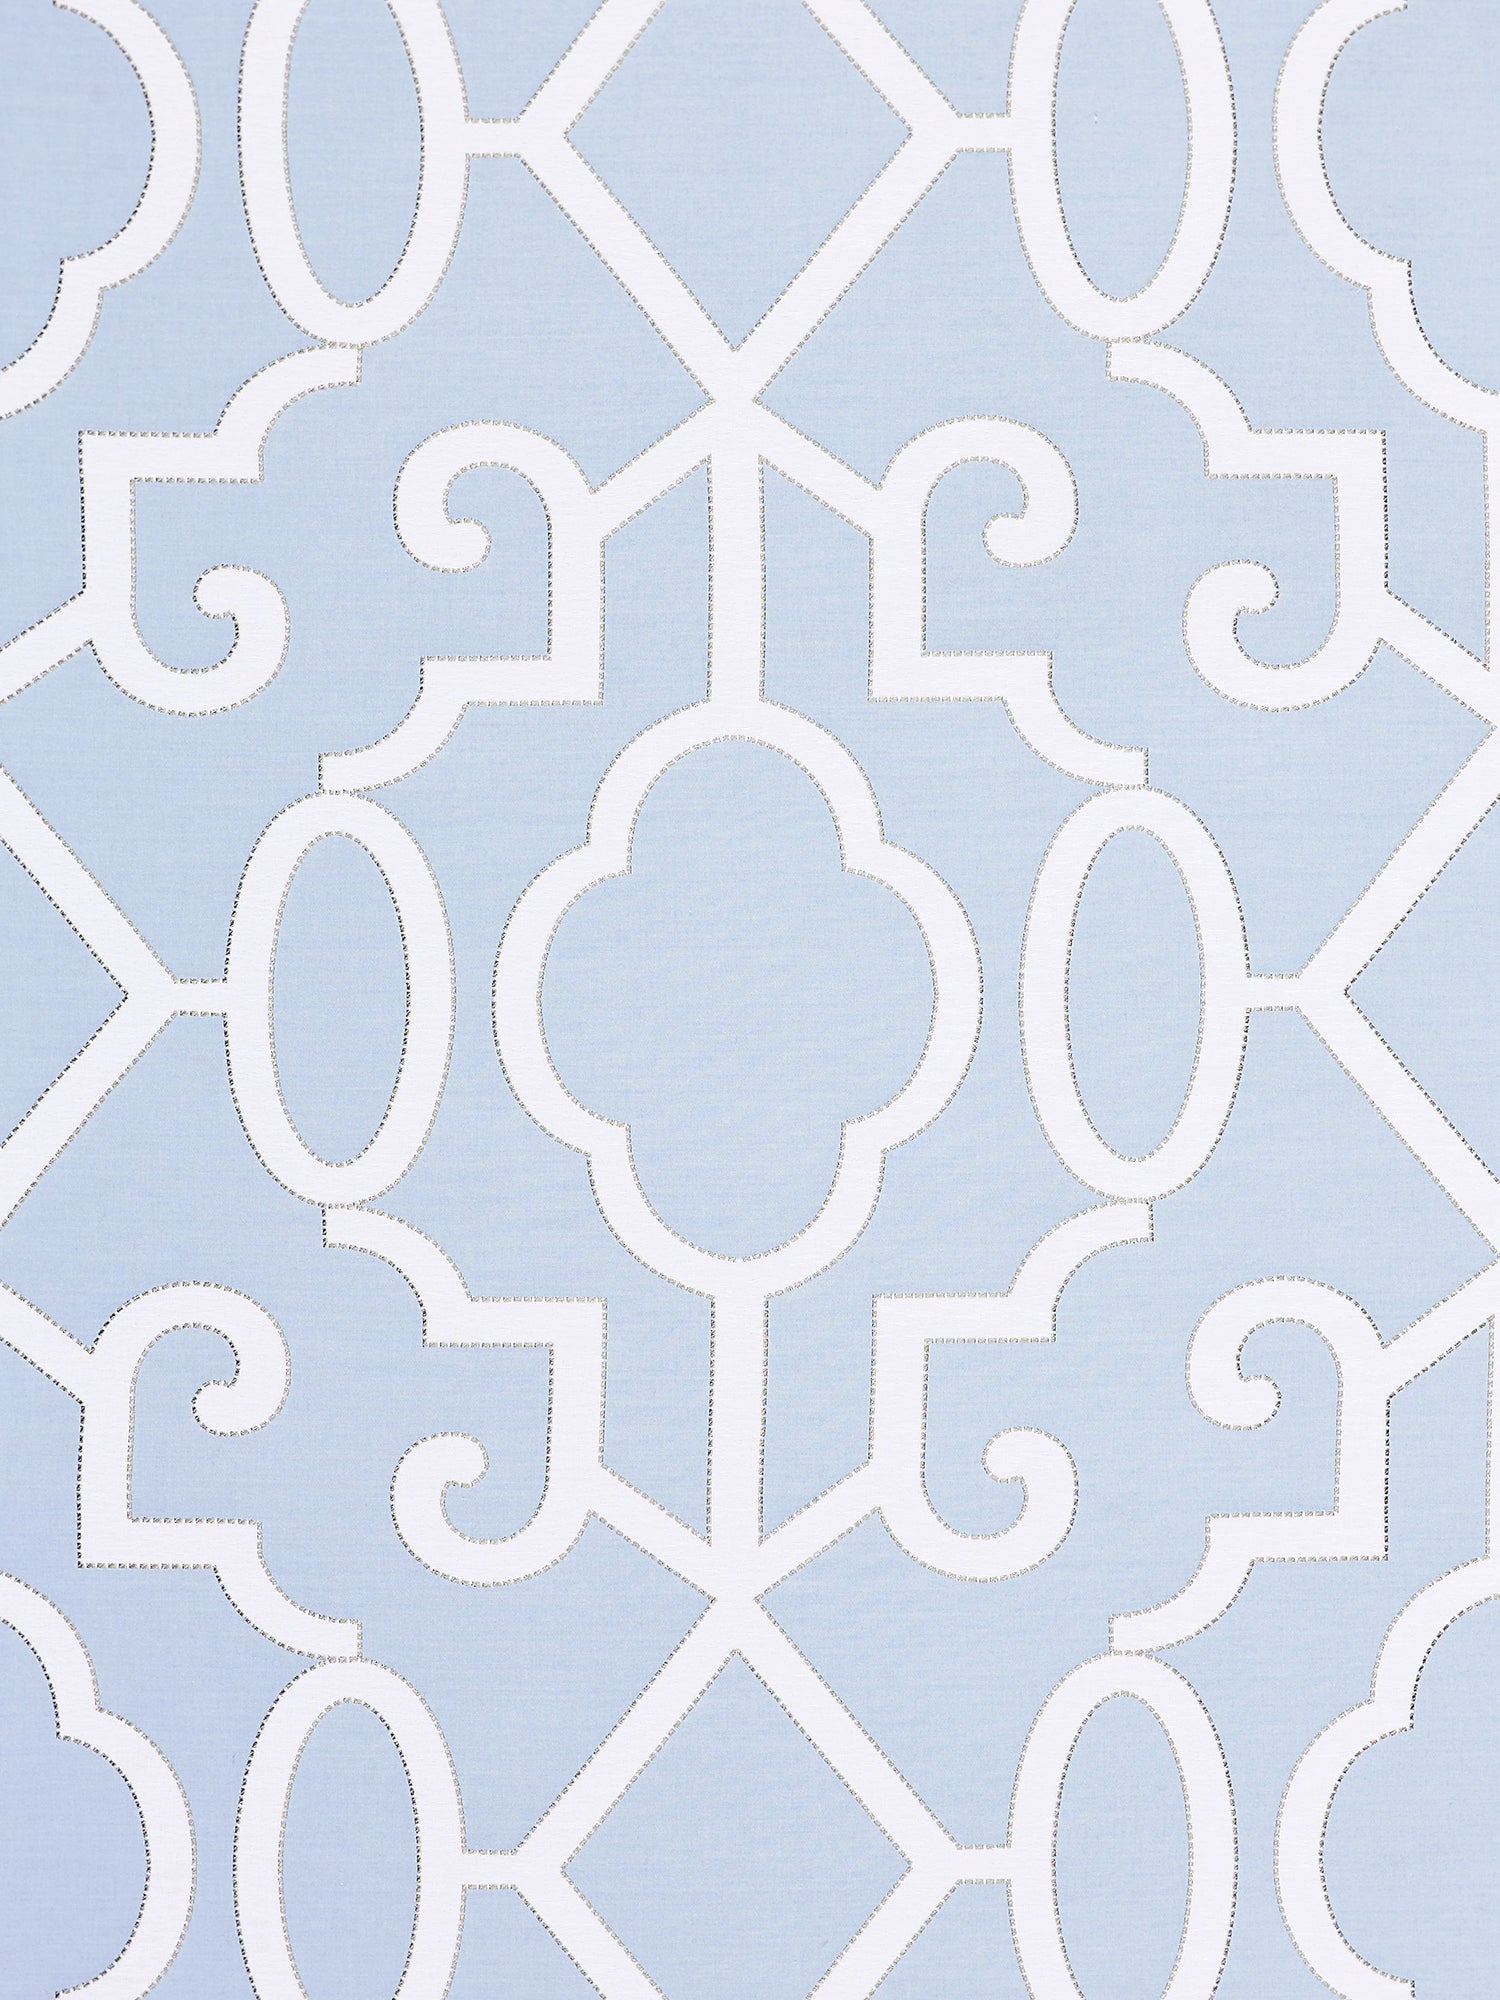 Ming Fretwork fabric in cloud color - pattern number SC 000227012 - by Scalamandre in the Scalamandre Fabrics Book 1 collection